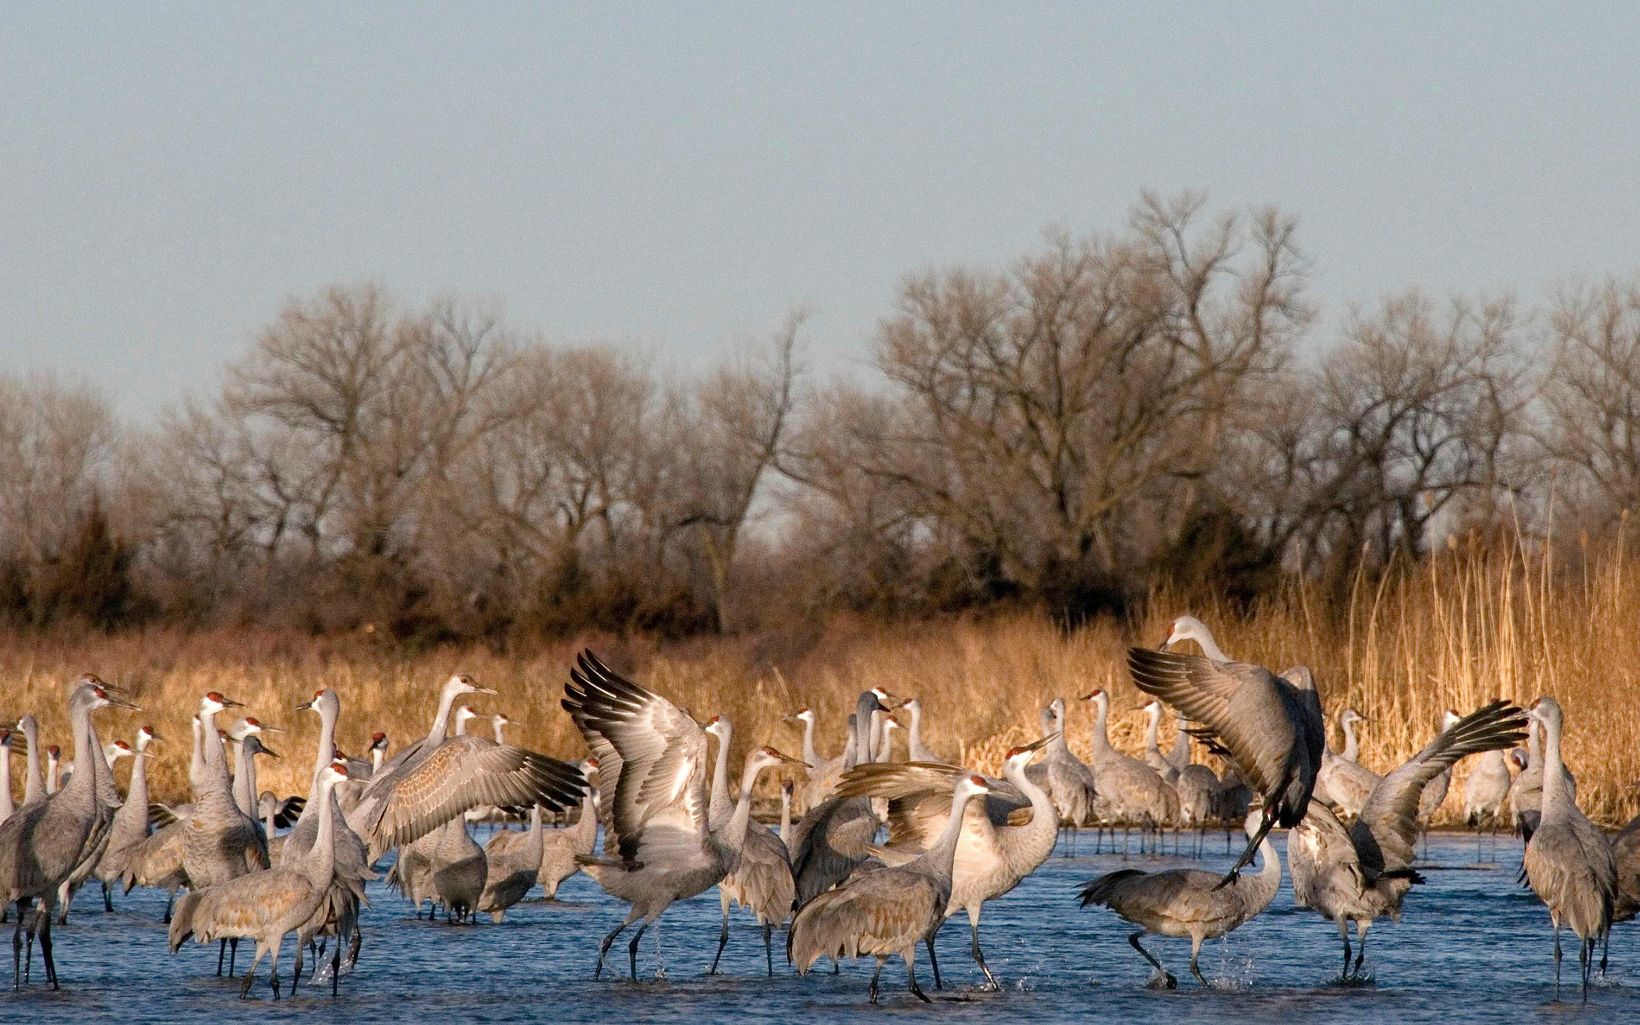 Sandhill cranes refuel at the Platte River in south central Nebraska during their annual migration.